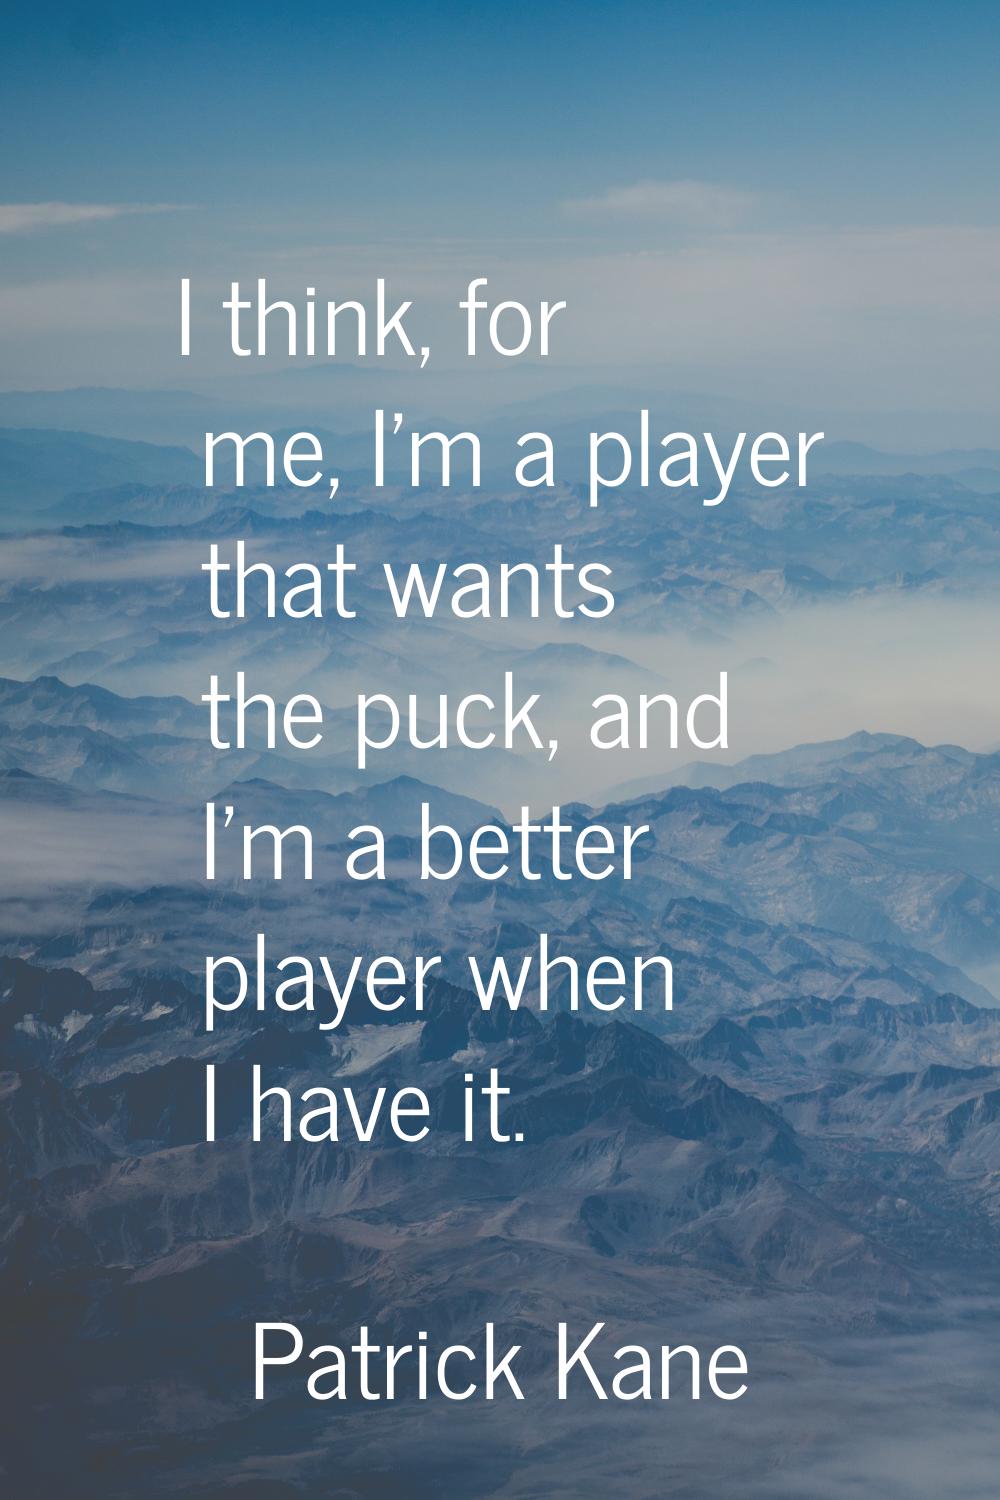 I think, for me, I'm a player that wants the puck, and I'm a better player when I have it.